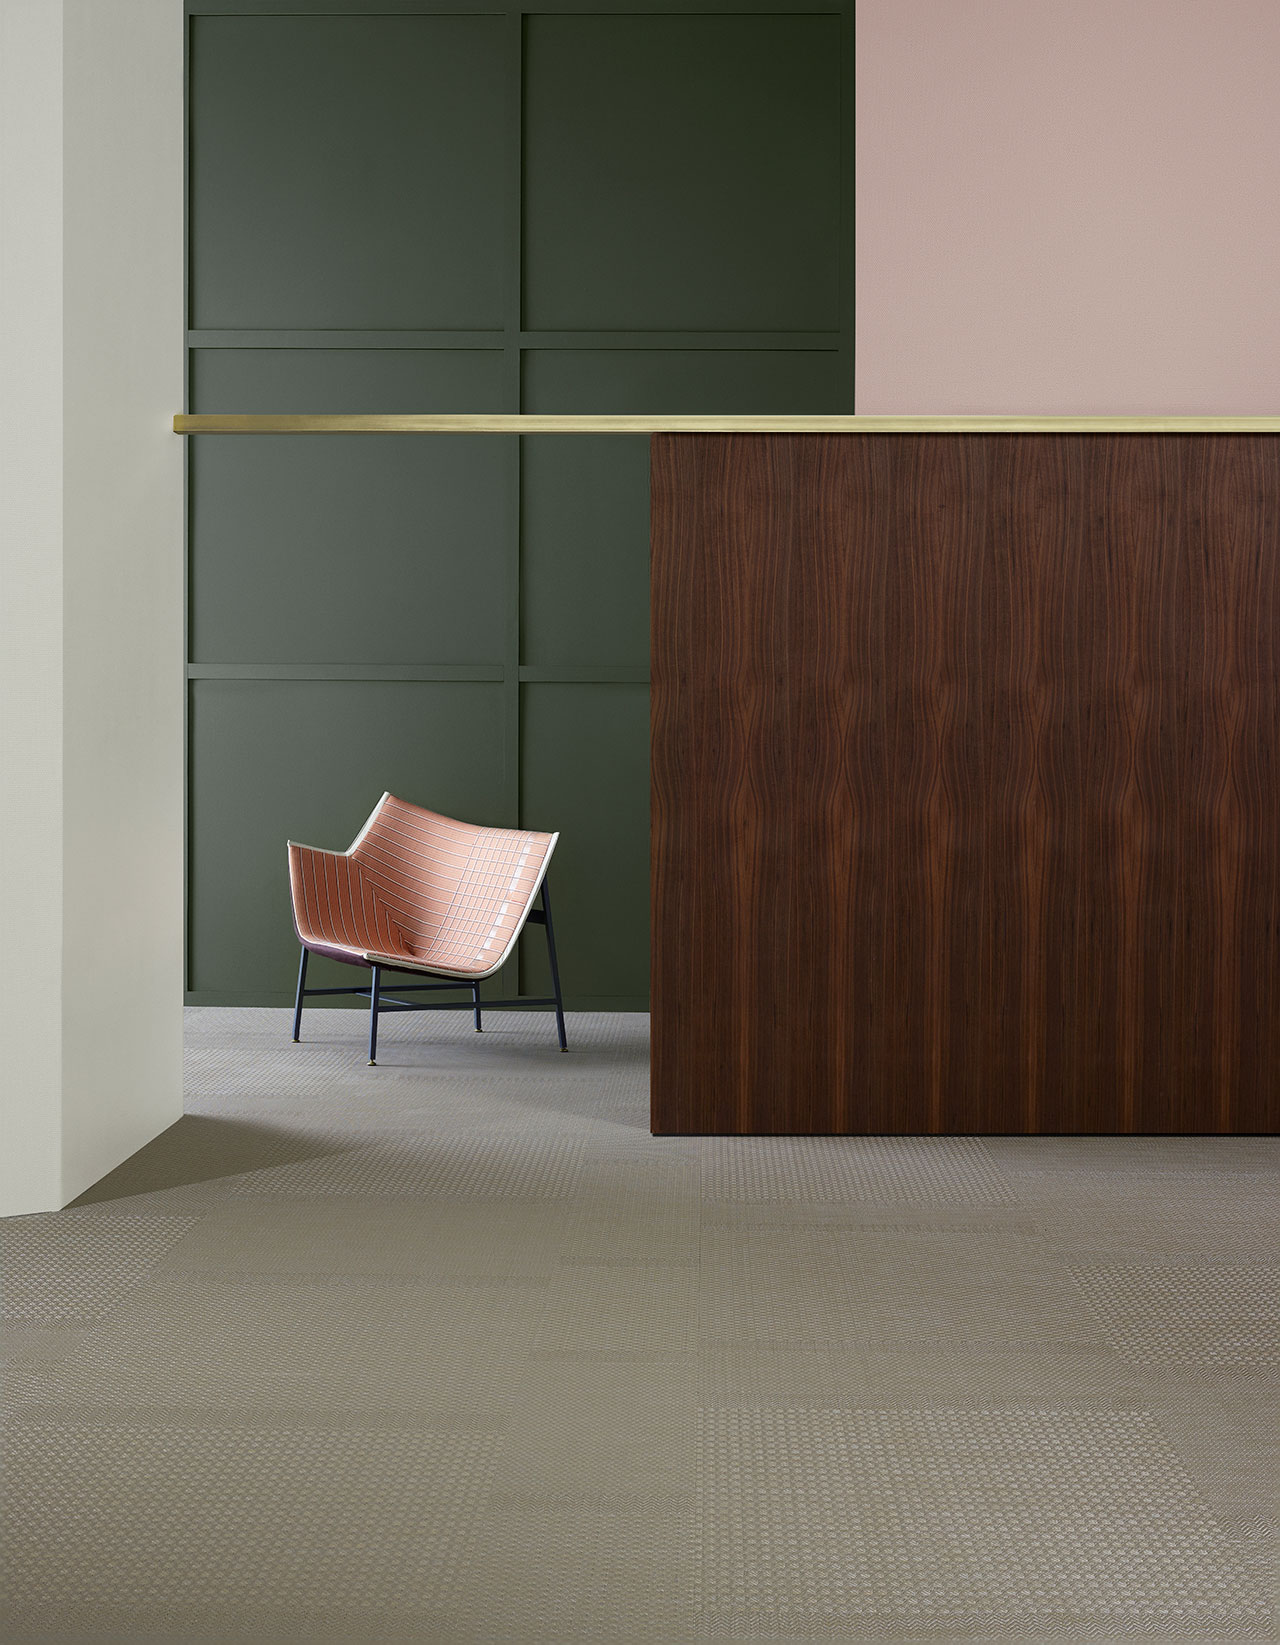 BOLON BY YOU – Weave Beige Sand Gloss.
Photo by Magnus Torsne.